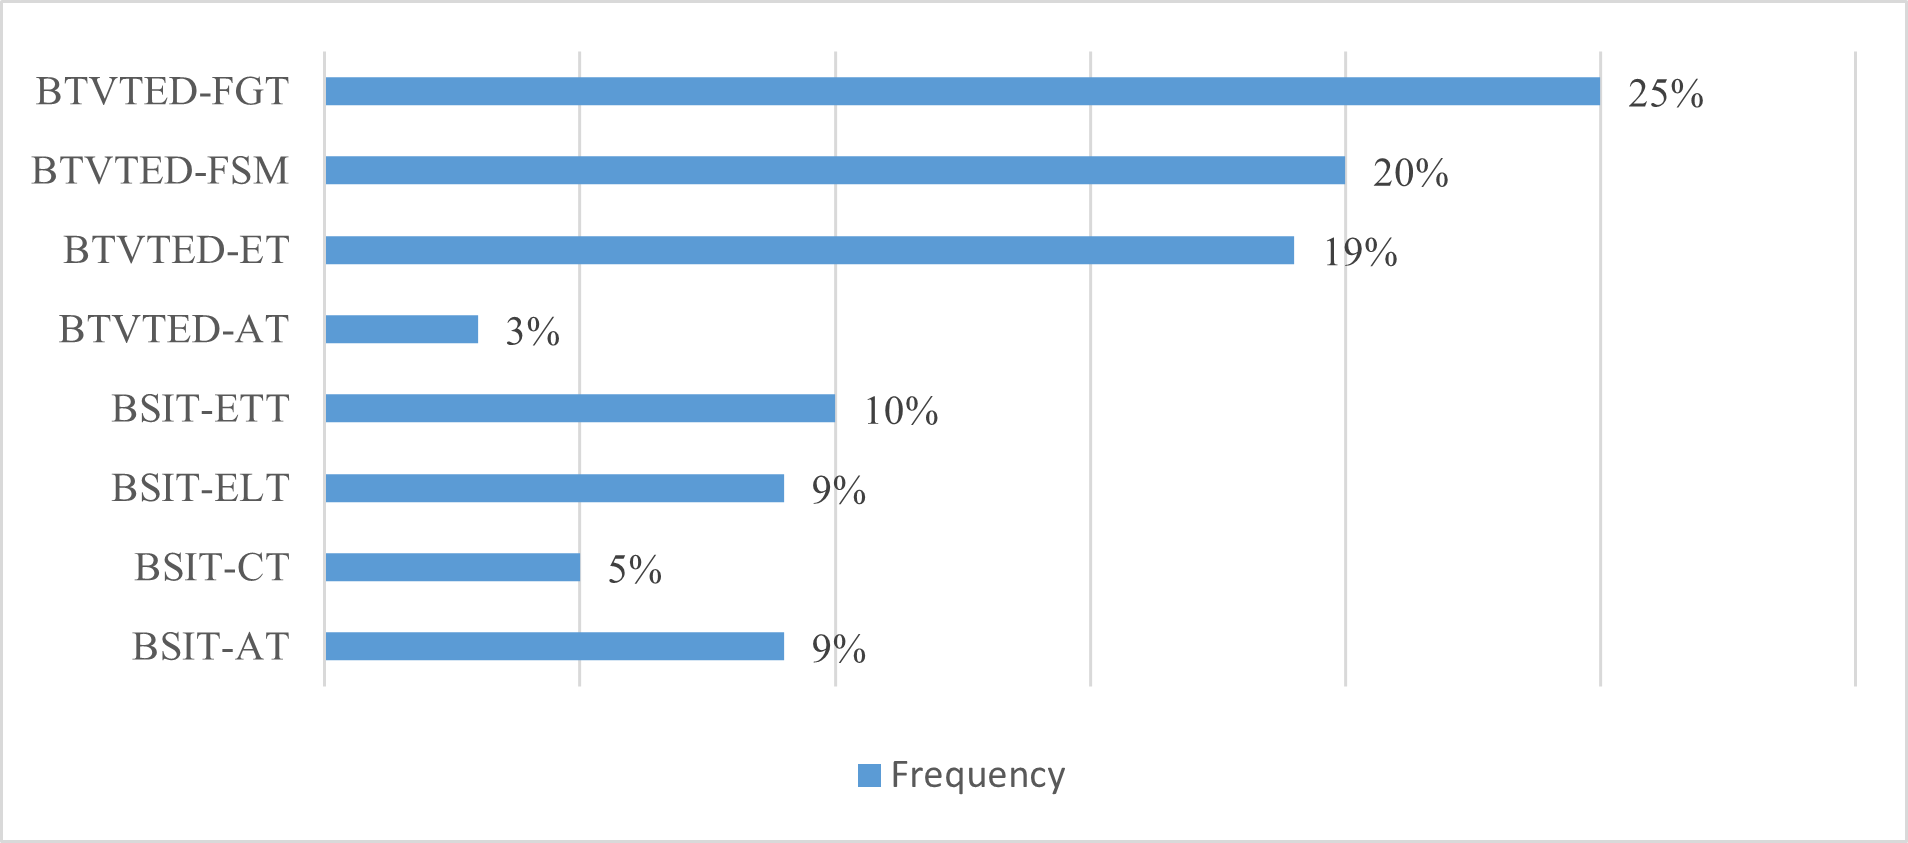 Distribution of Respondents by Degree Program